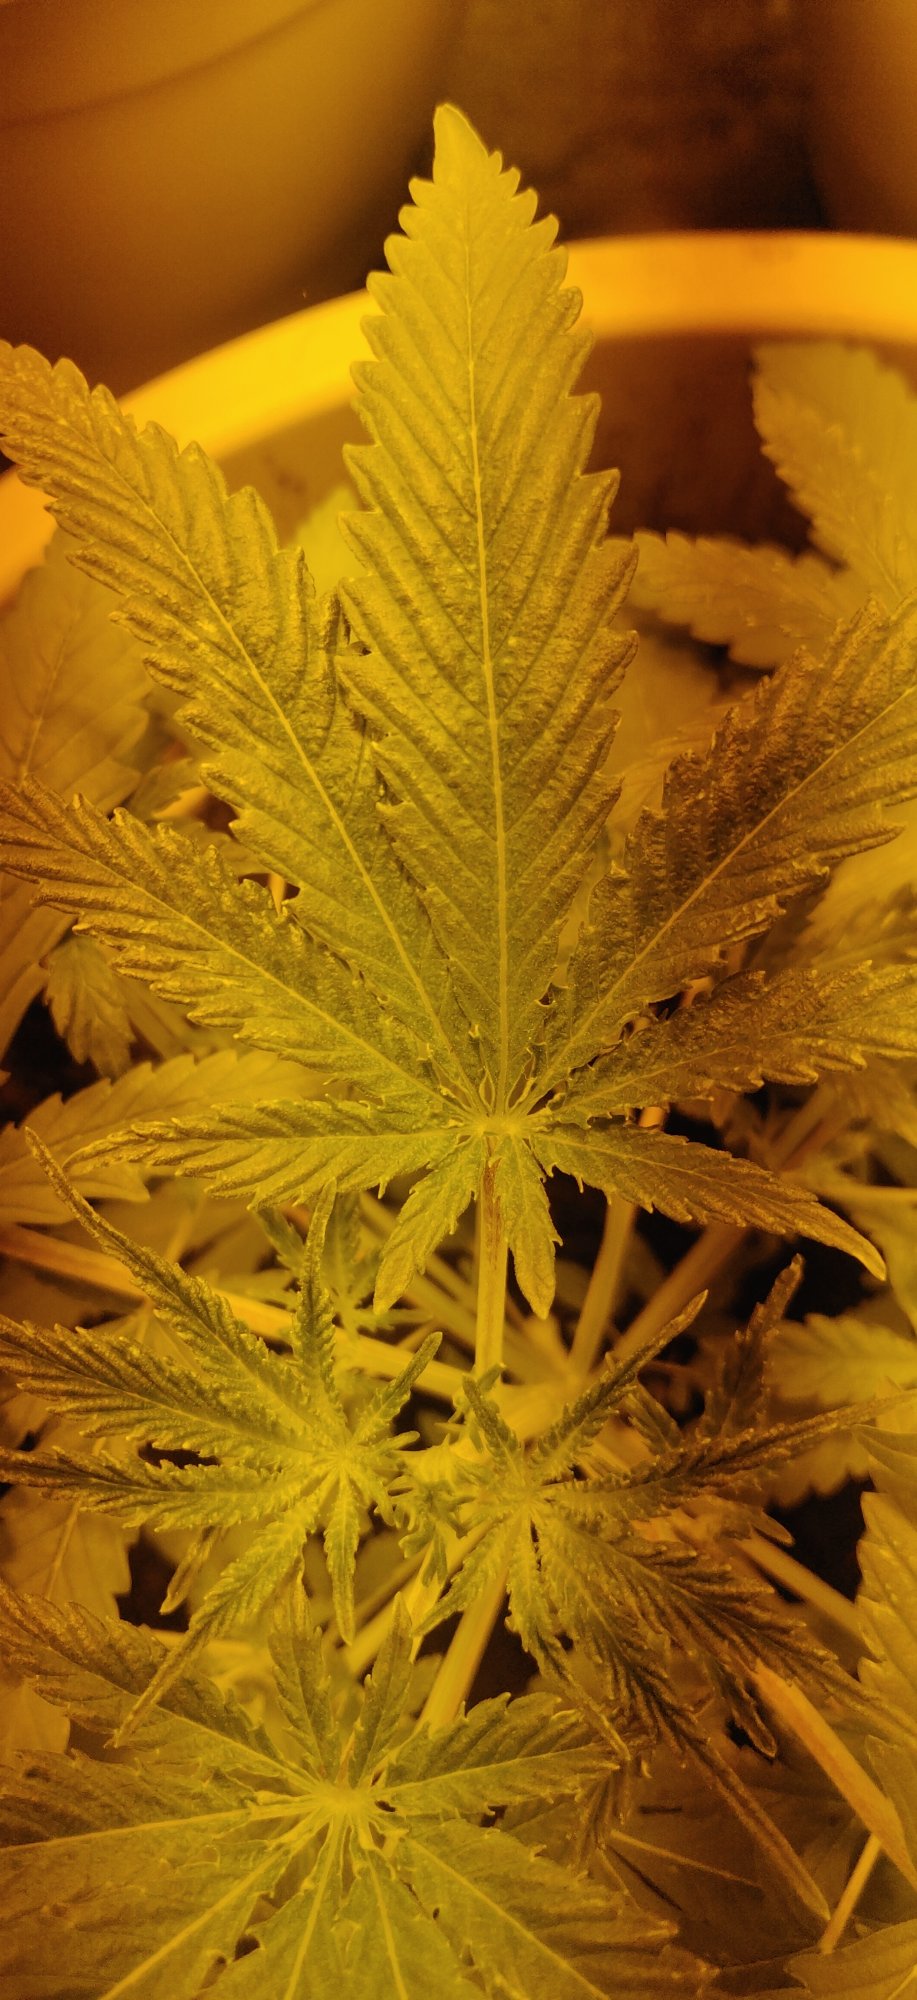 Problem with a grow 5